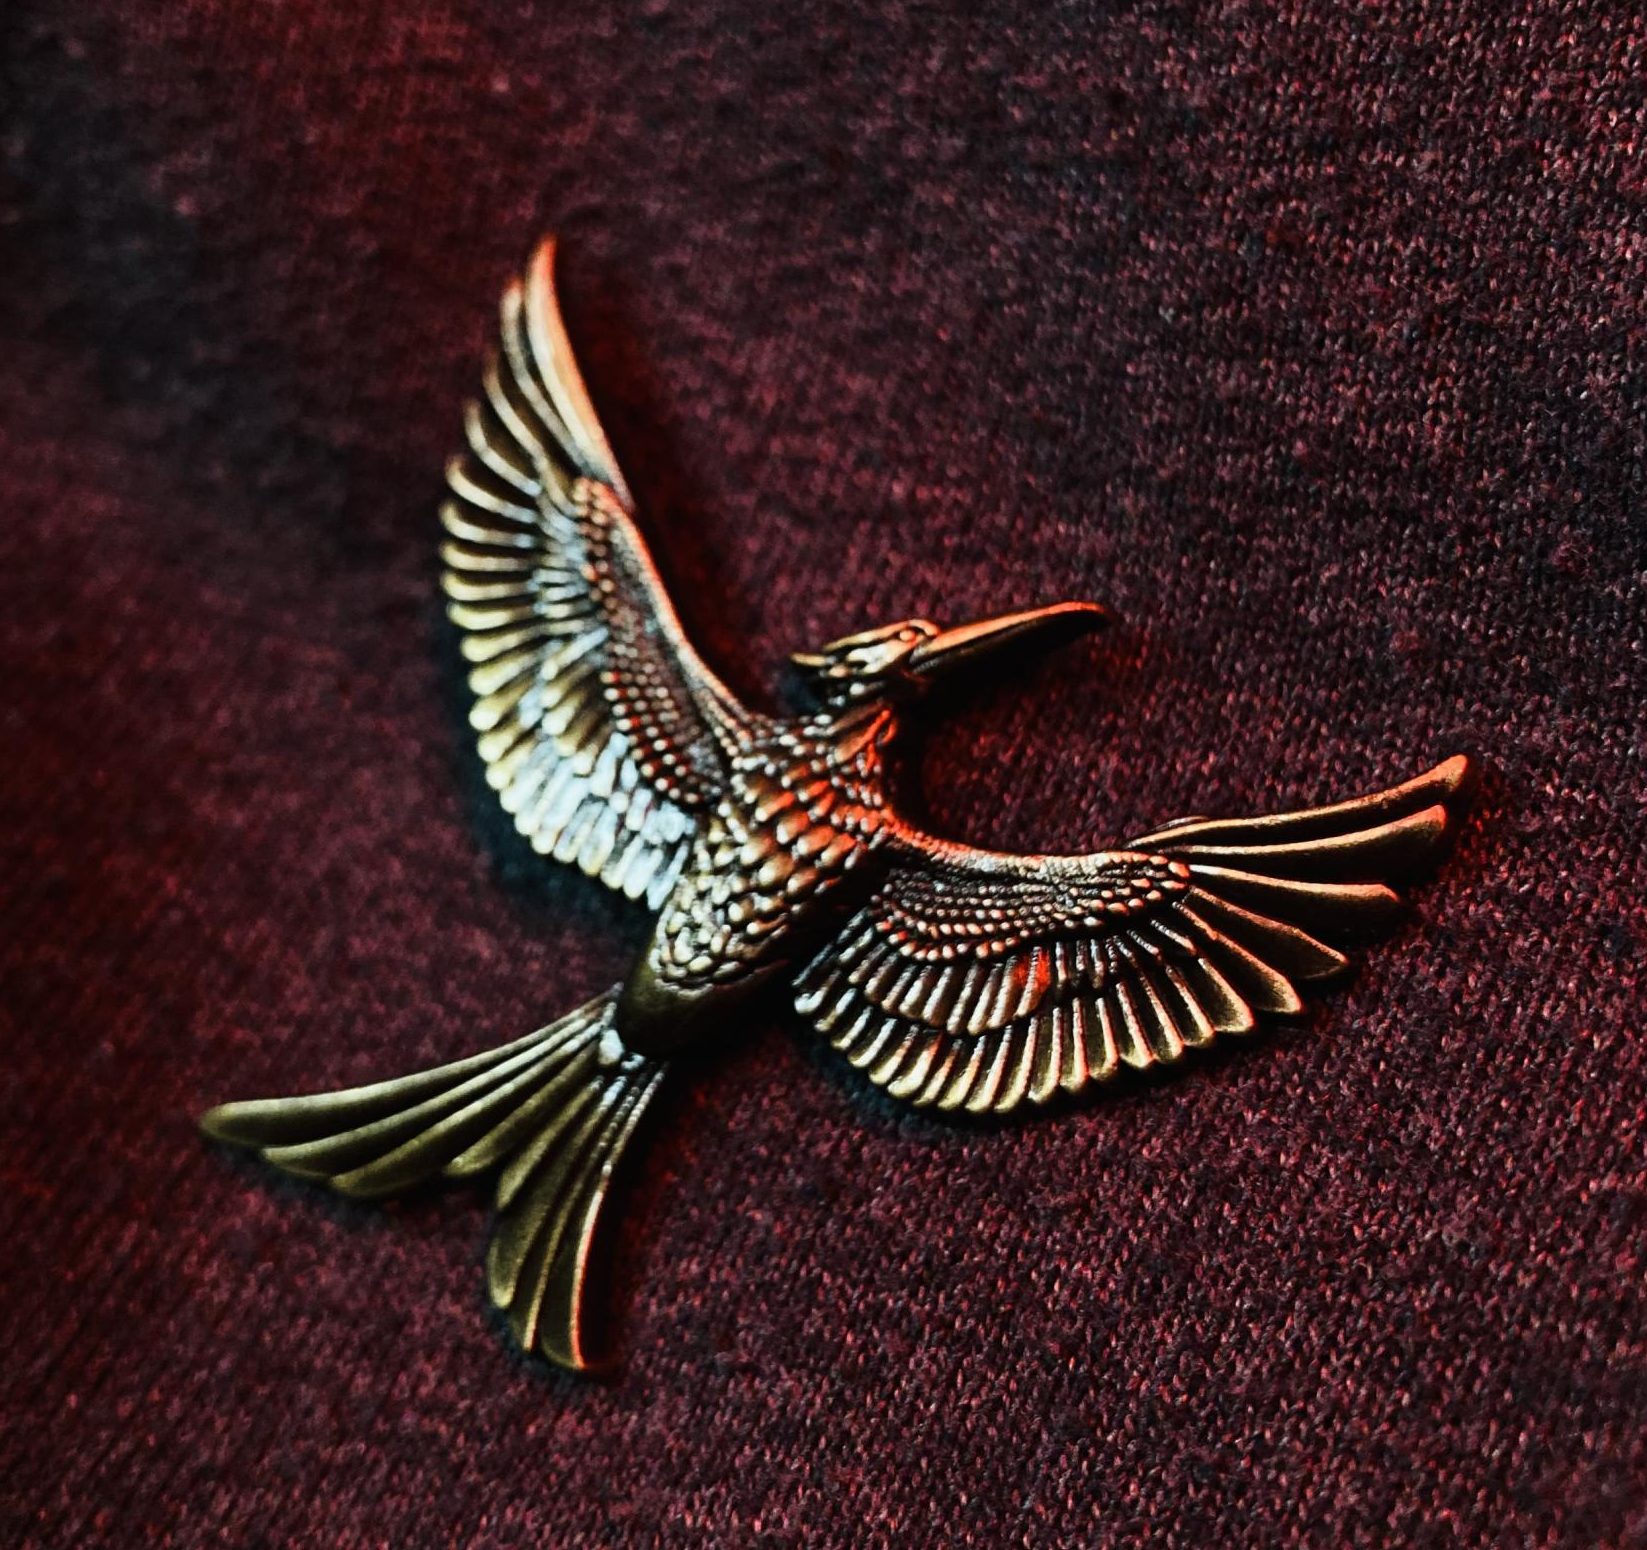 The Mockingjay pin paying tribute to the symbol of the rebellion from the original Hunger Game films